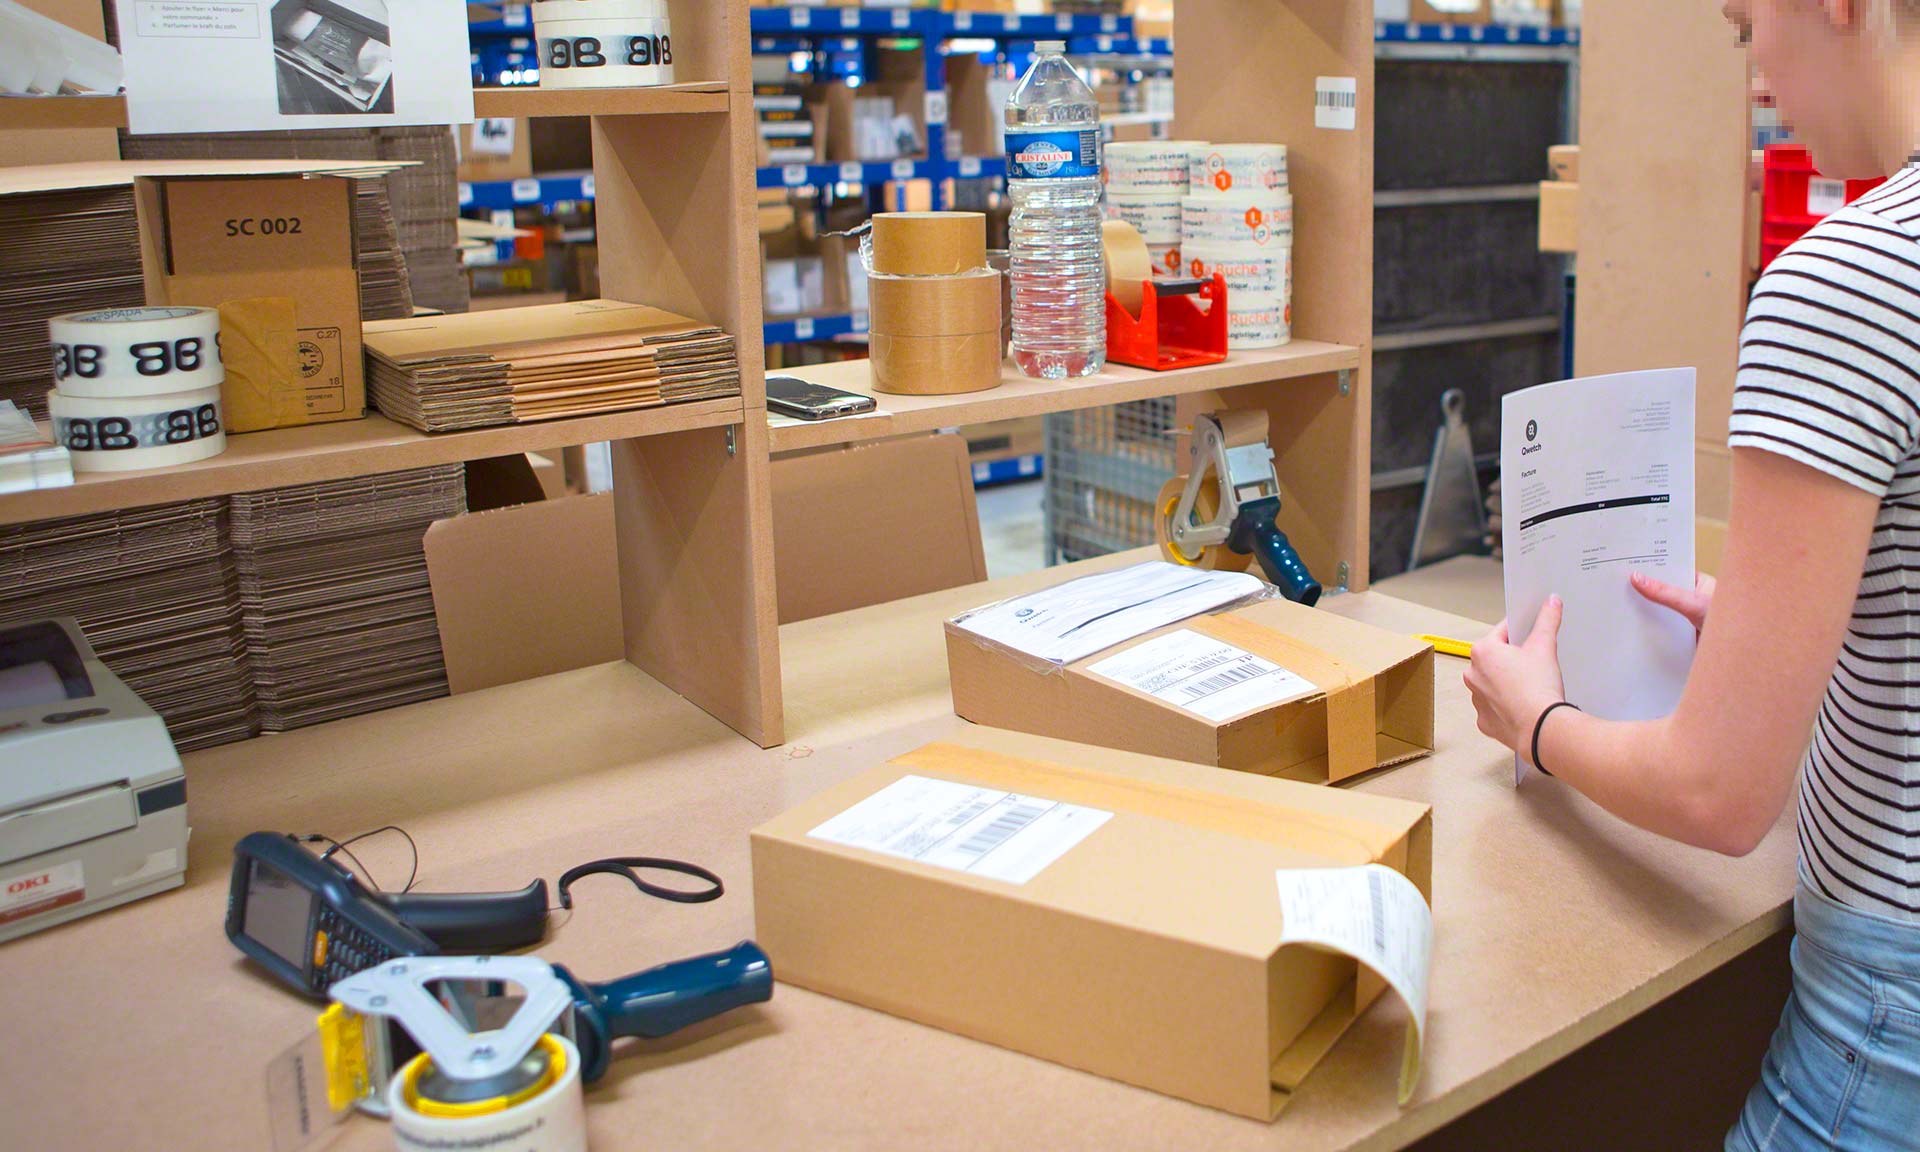 Ship-to-store consists of sending orders to stores so that customers can pick them up there